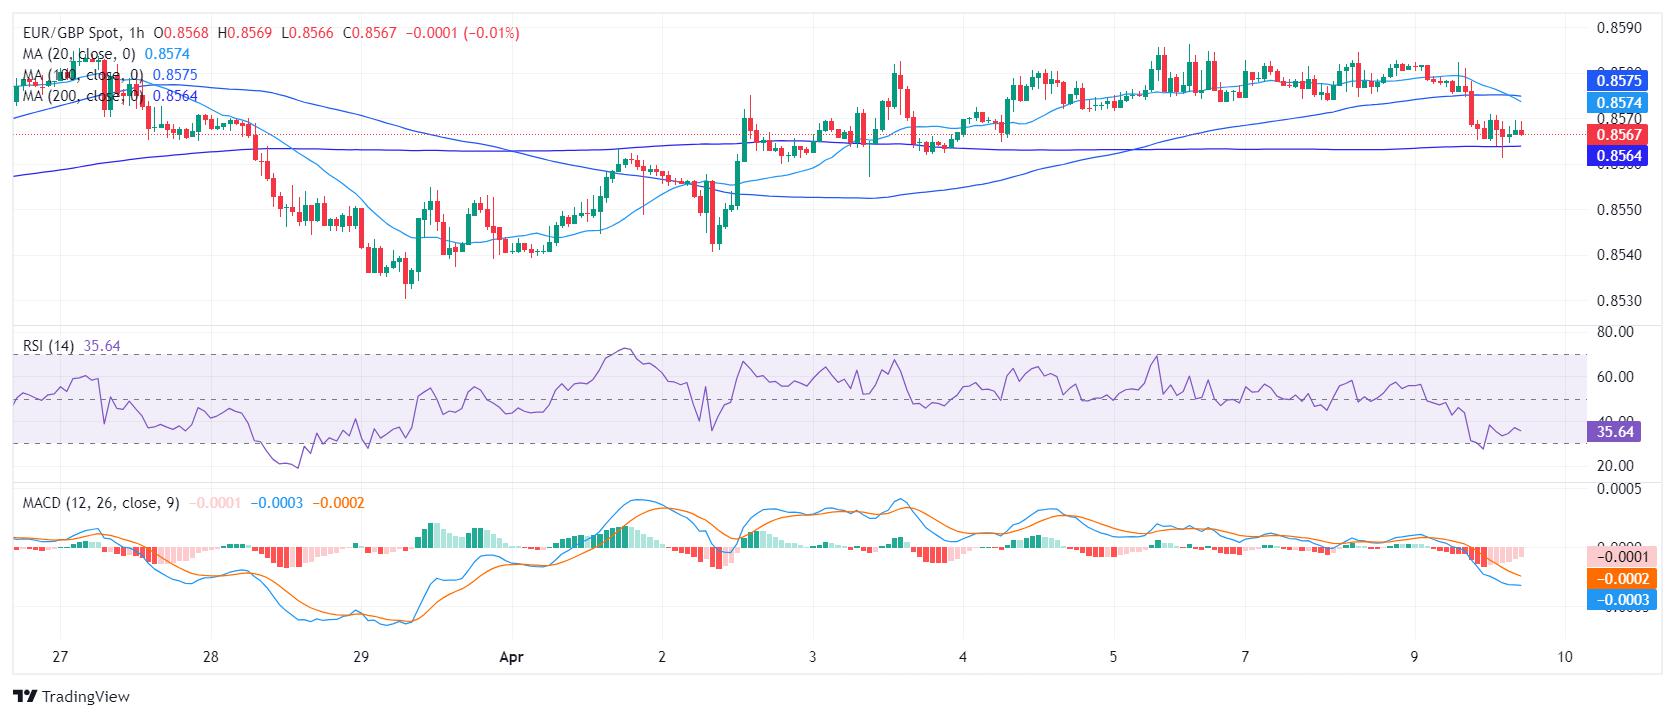 EUR/GBP Price Analysis: Bulls meet strong resistance at the 100-day SMA